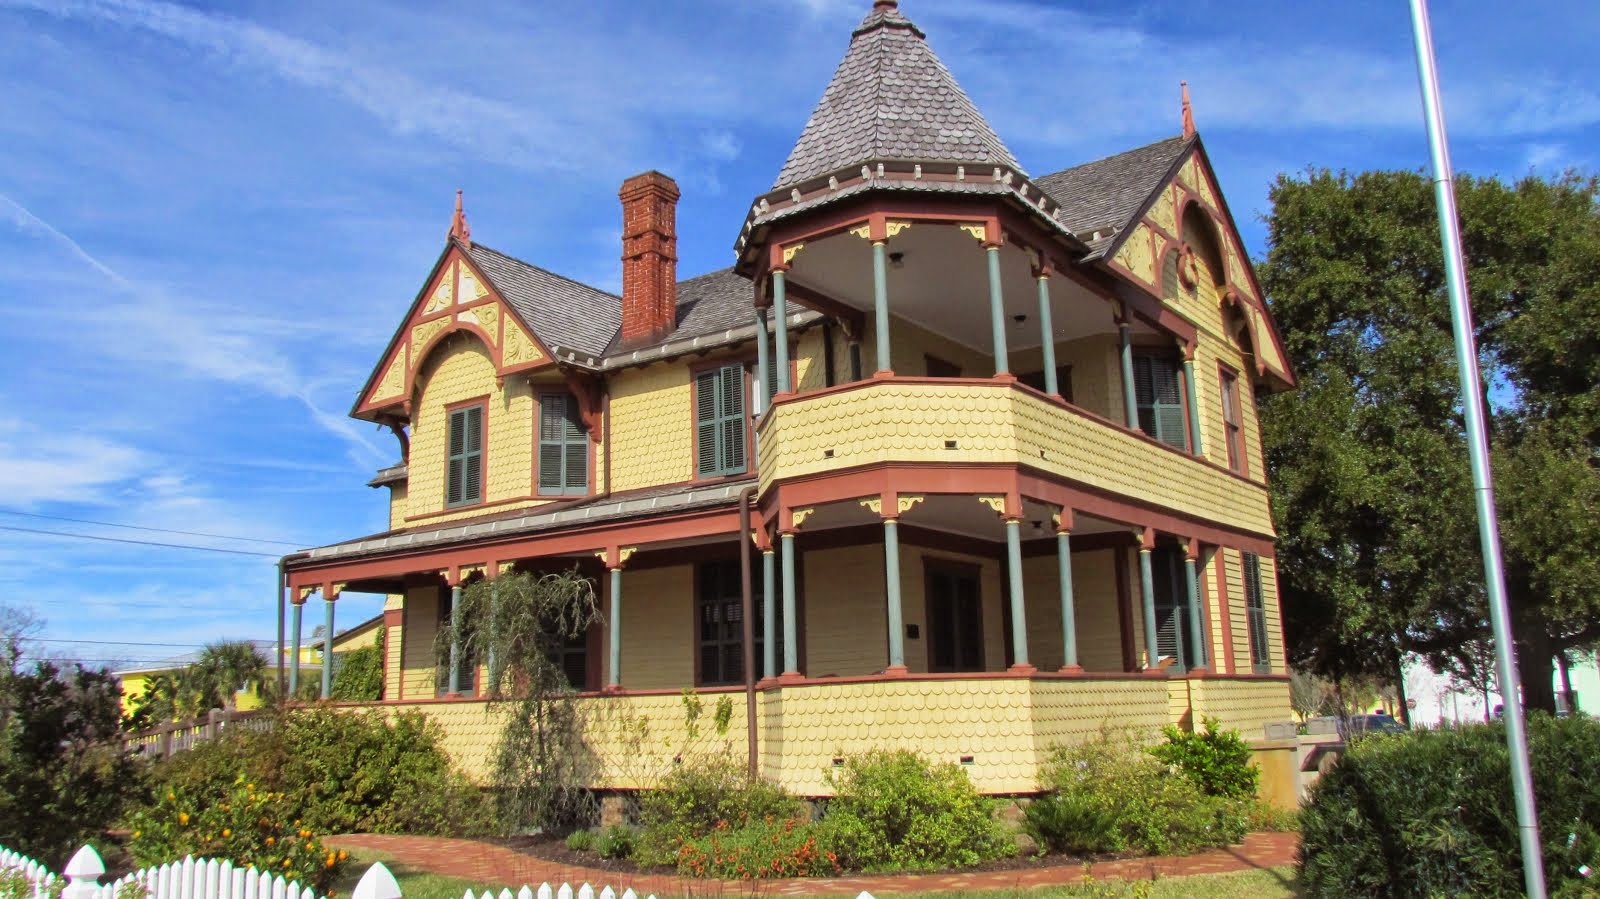 The historic, Pritchard House in Titusville, Florida